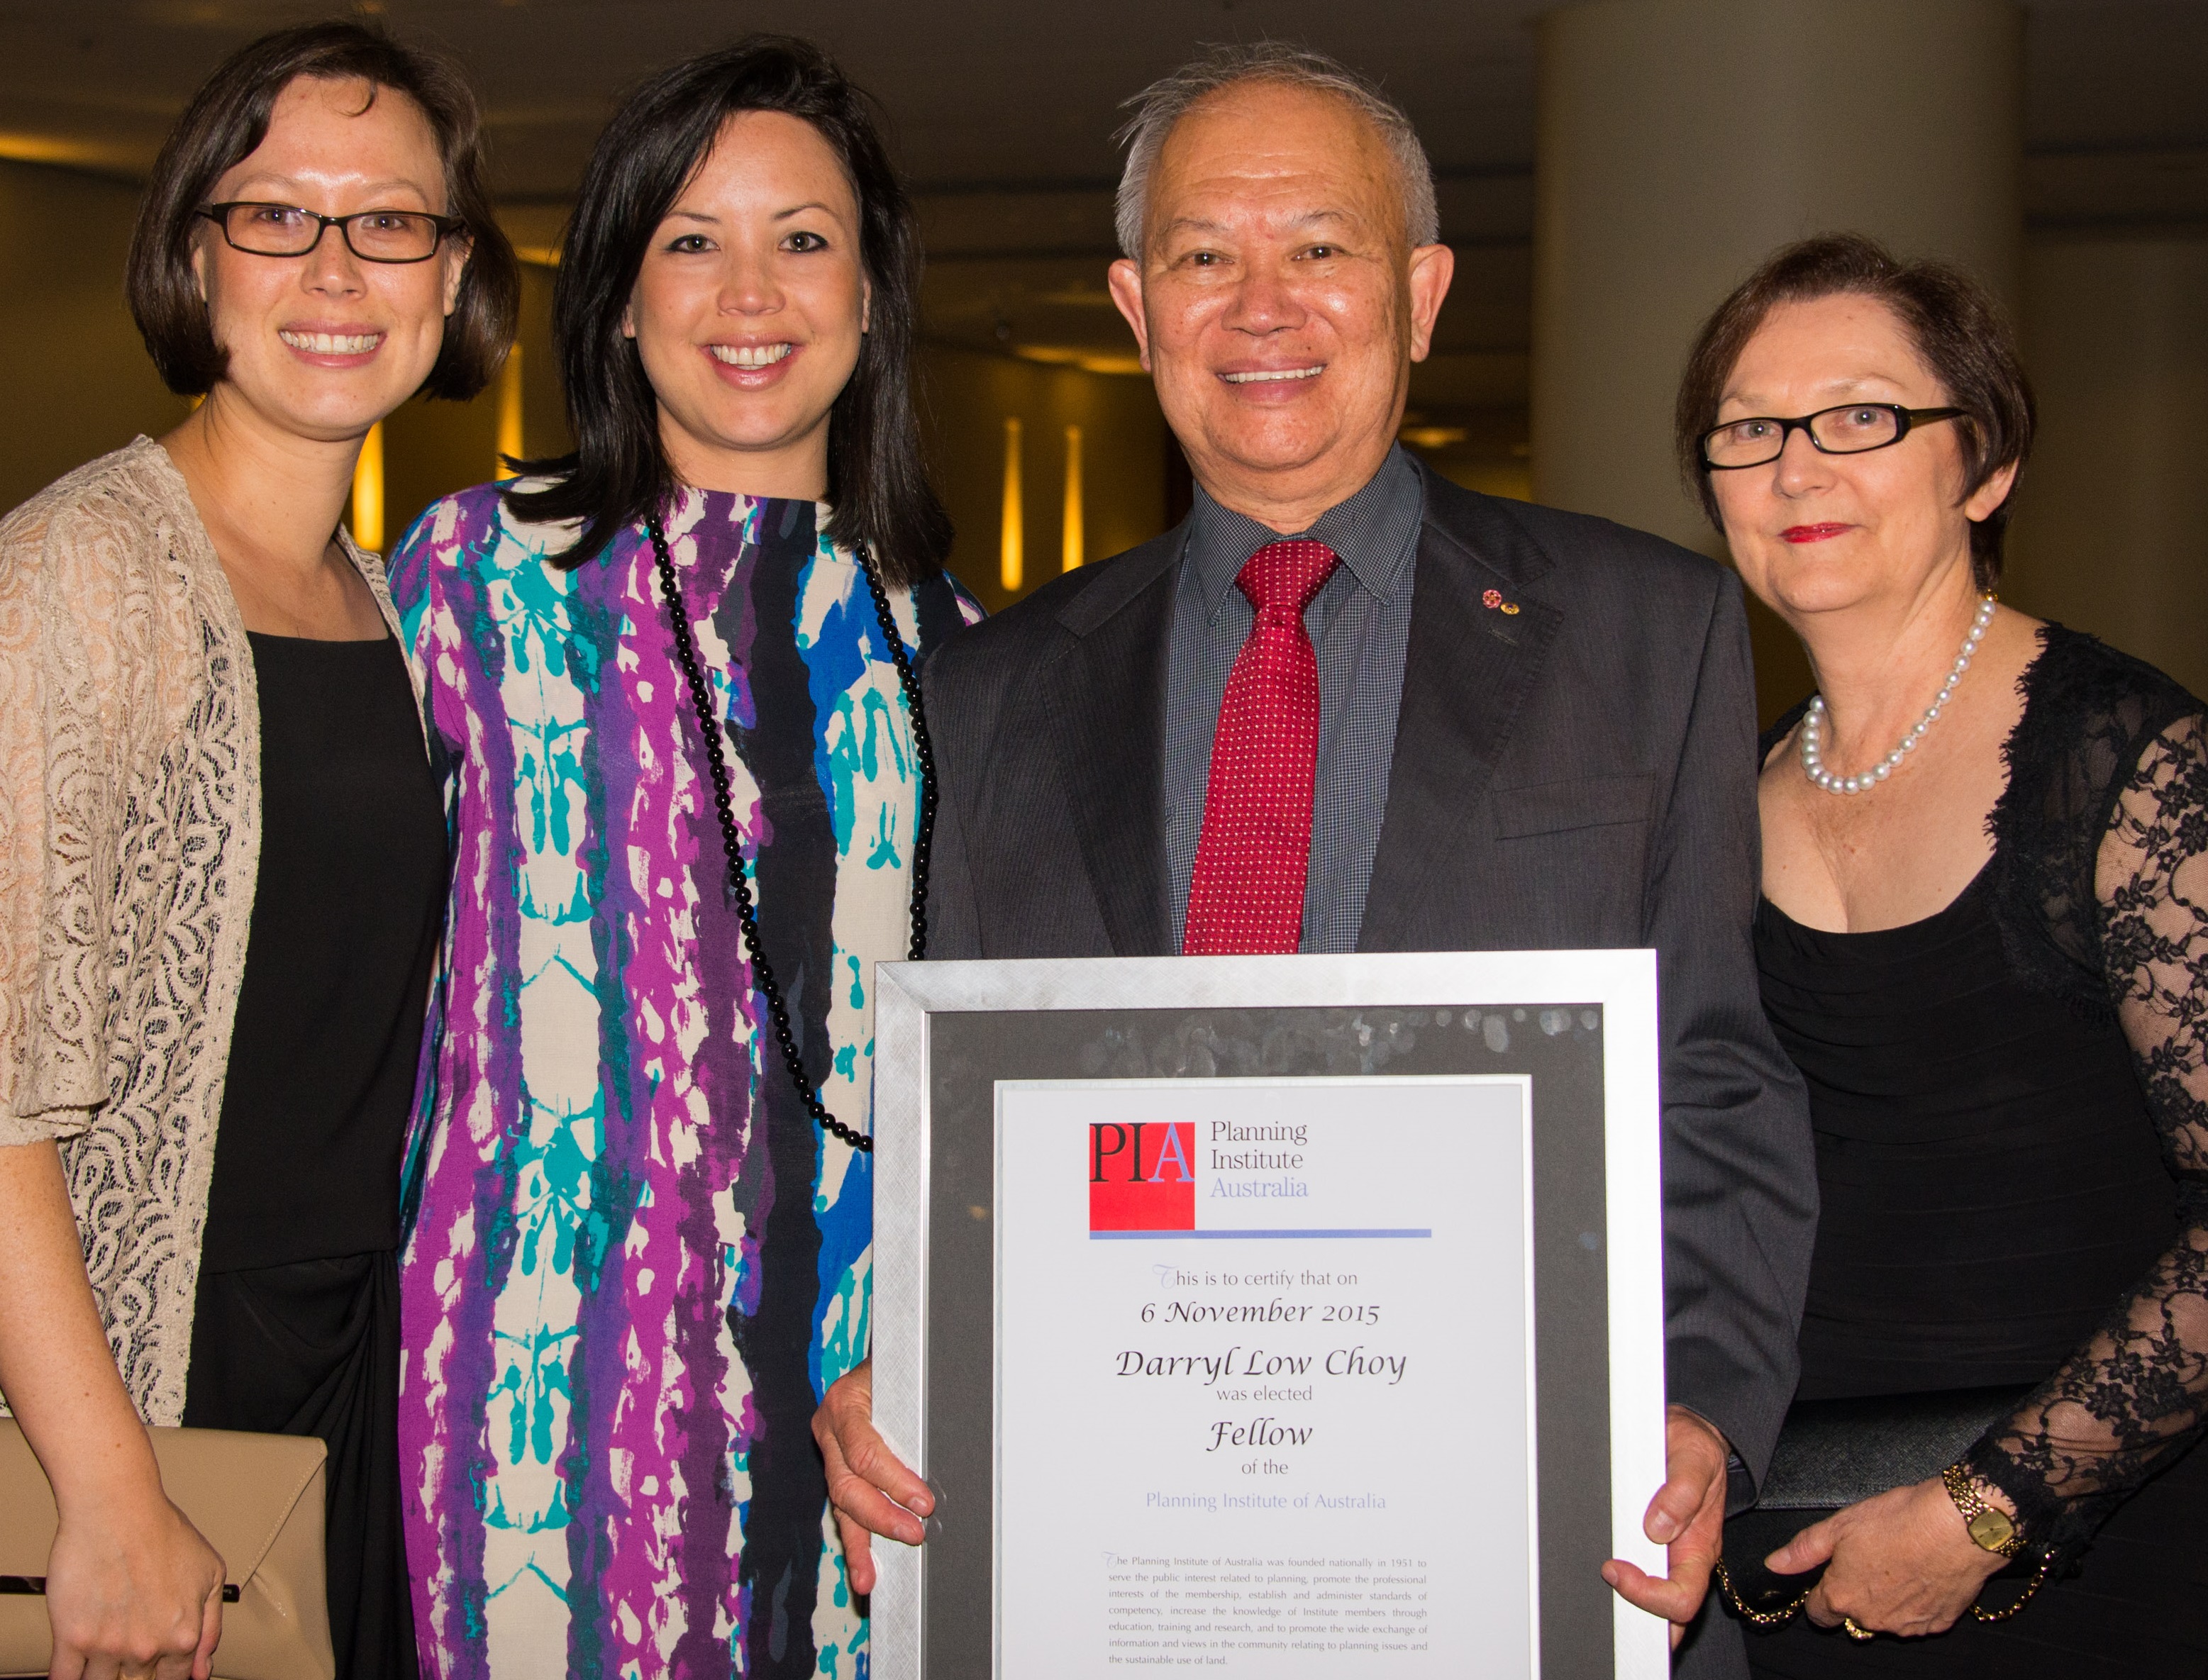 Professor Darryl Low Choy, new Fellow of the Planning Institute of Australia, with wife Nancy and daughters Jacquie and Amanda